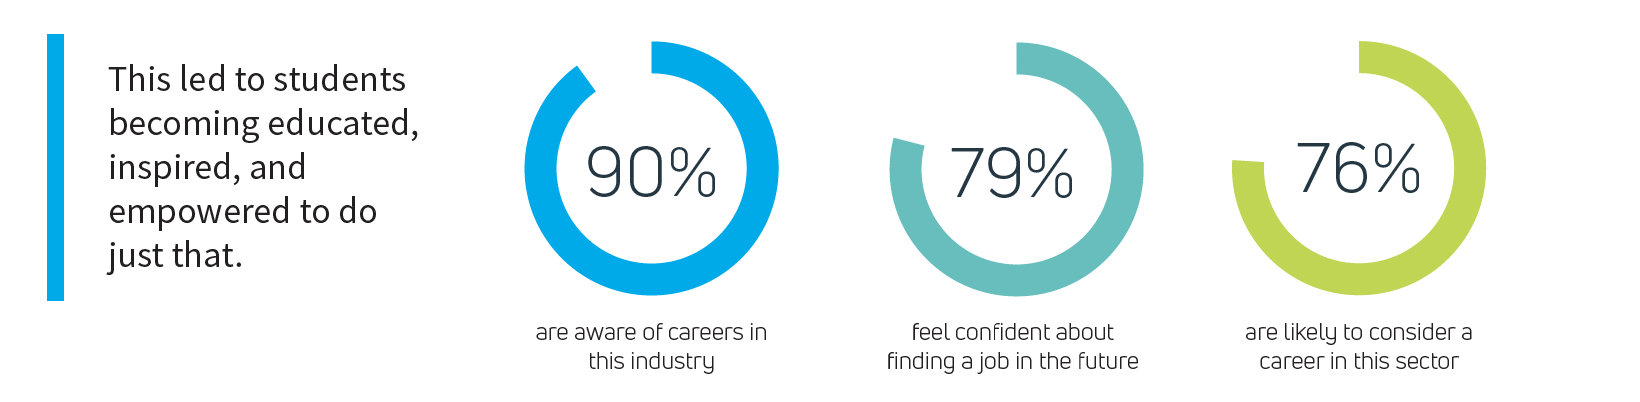 This lied to students beocming educated, inspired, and empowered. 90% are aware of careers in the industry.  79% feel confident about finding a job in the future. 76% are likely to consider a career in this sector.